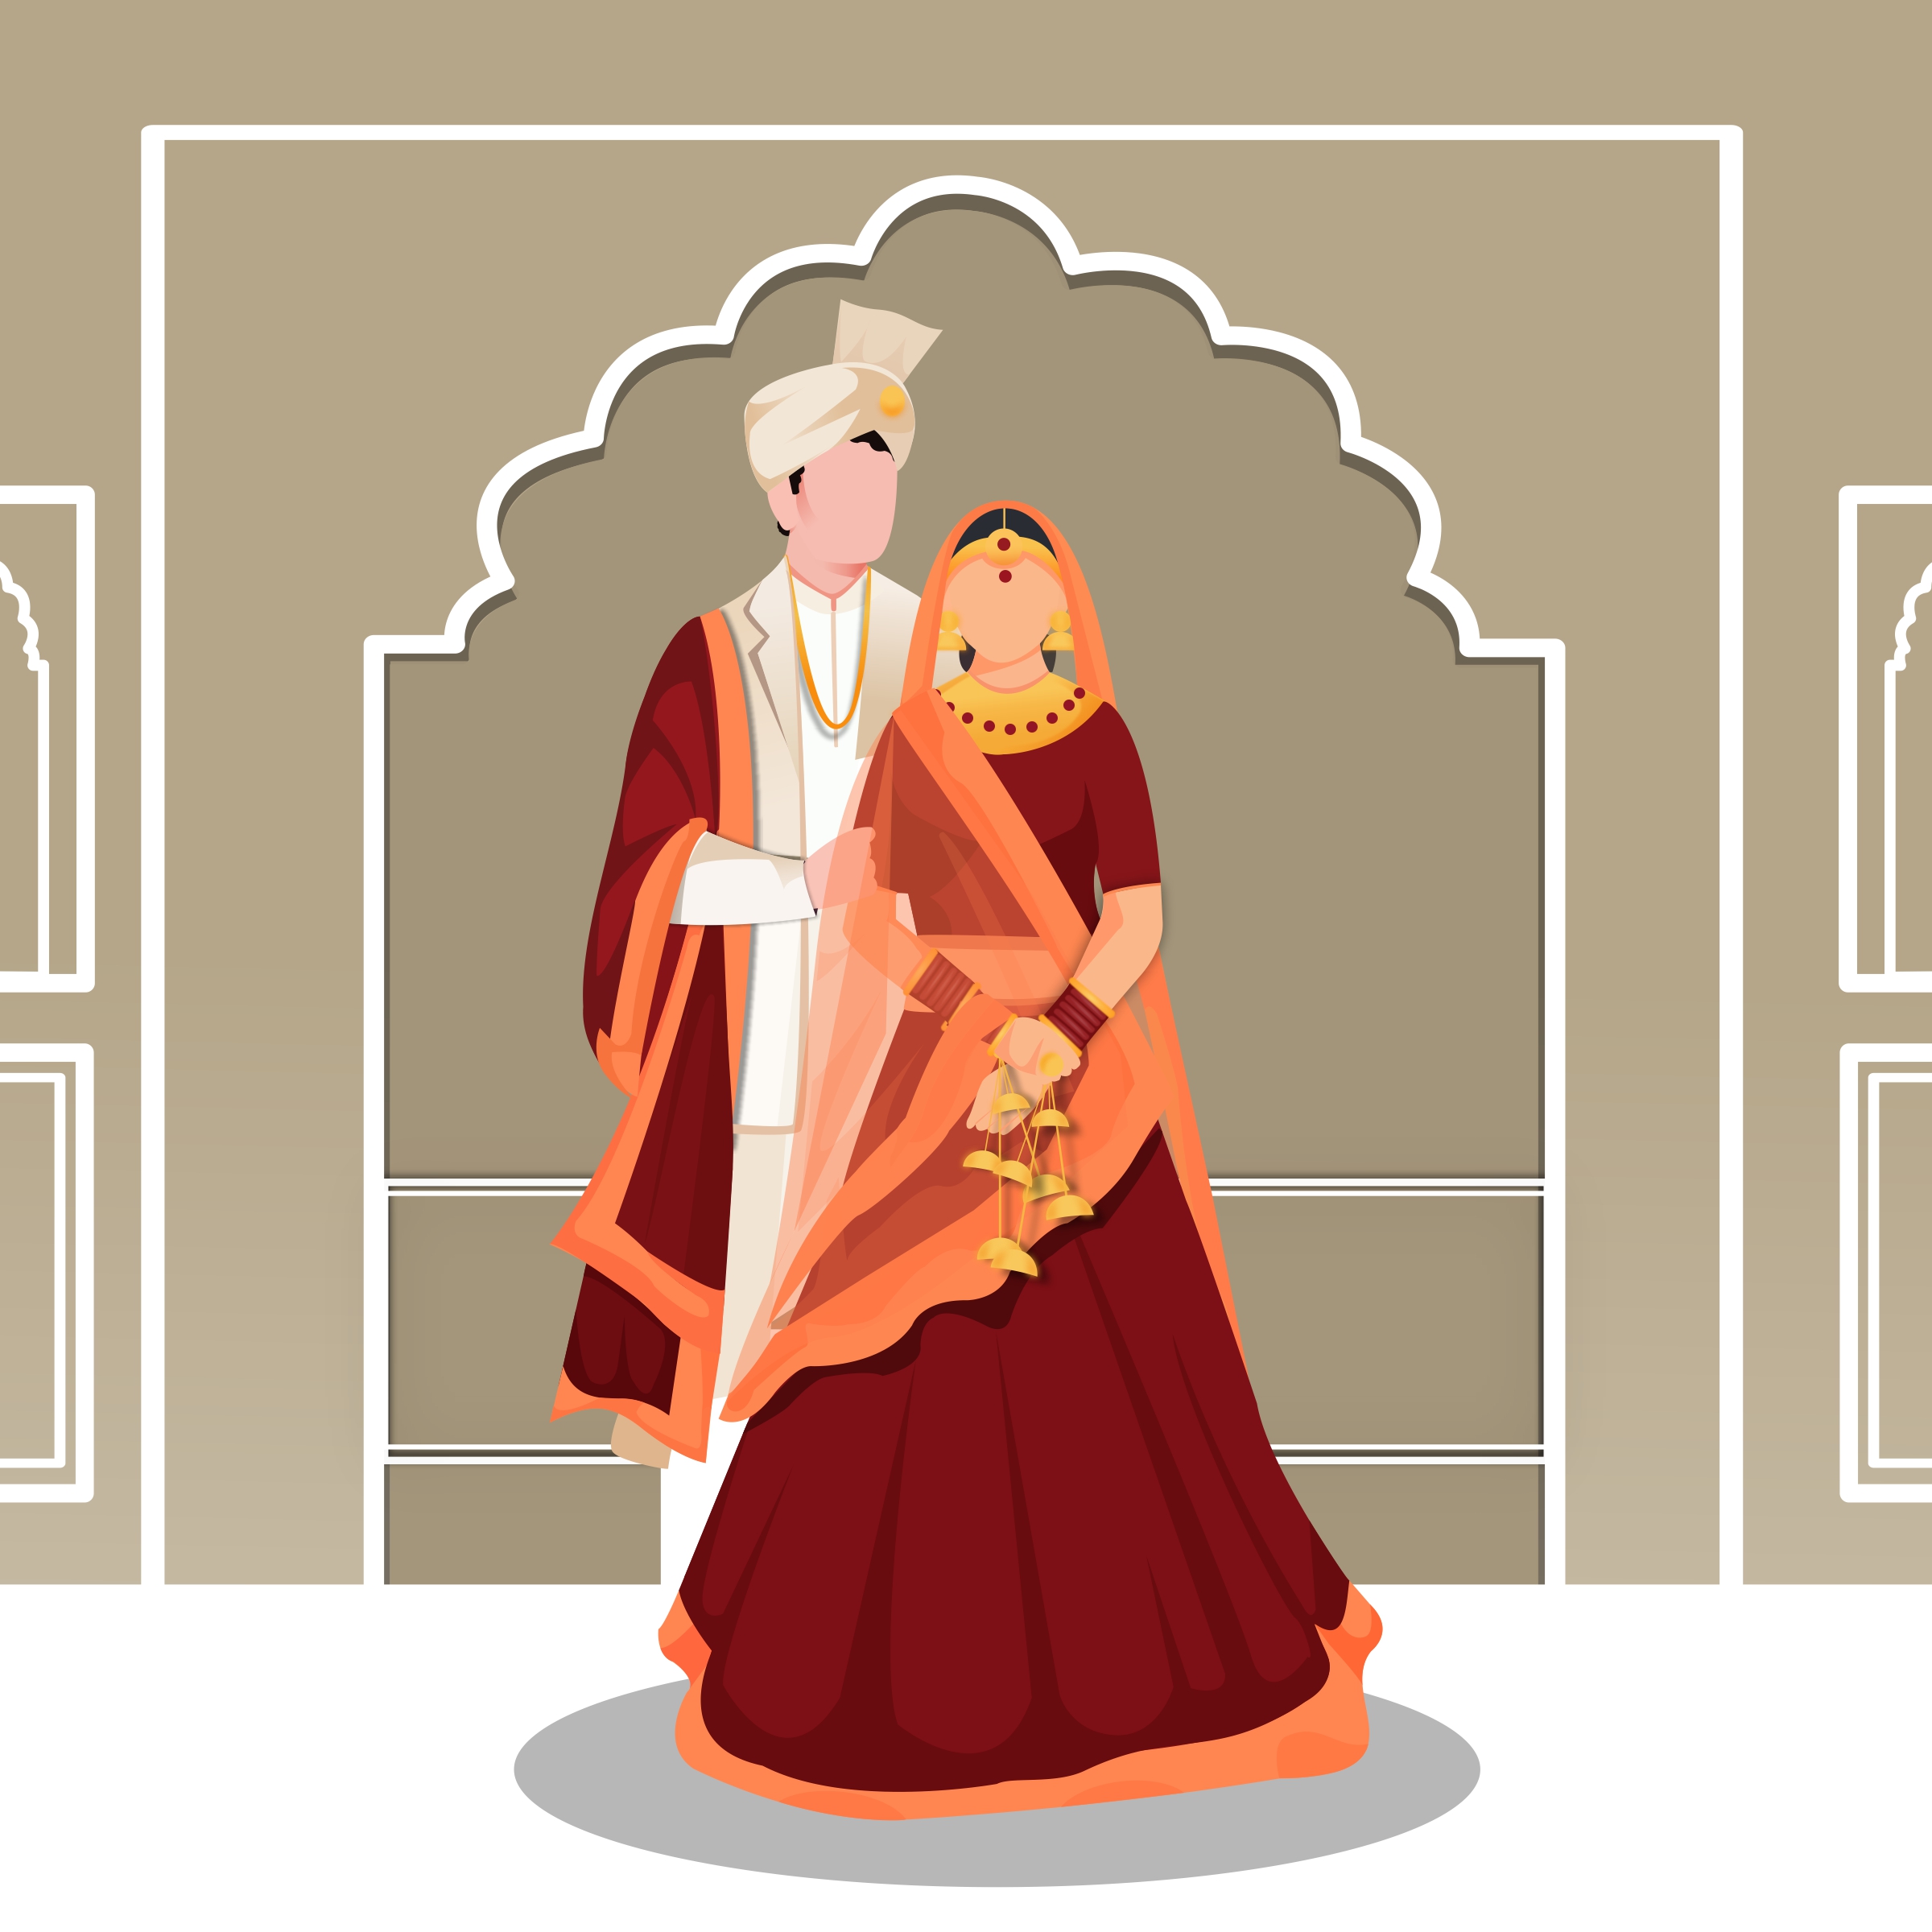 Marriage Couples bride and groom marriage free image, Bride and Groom free vector image download